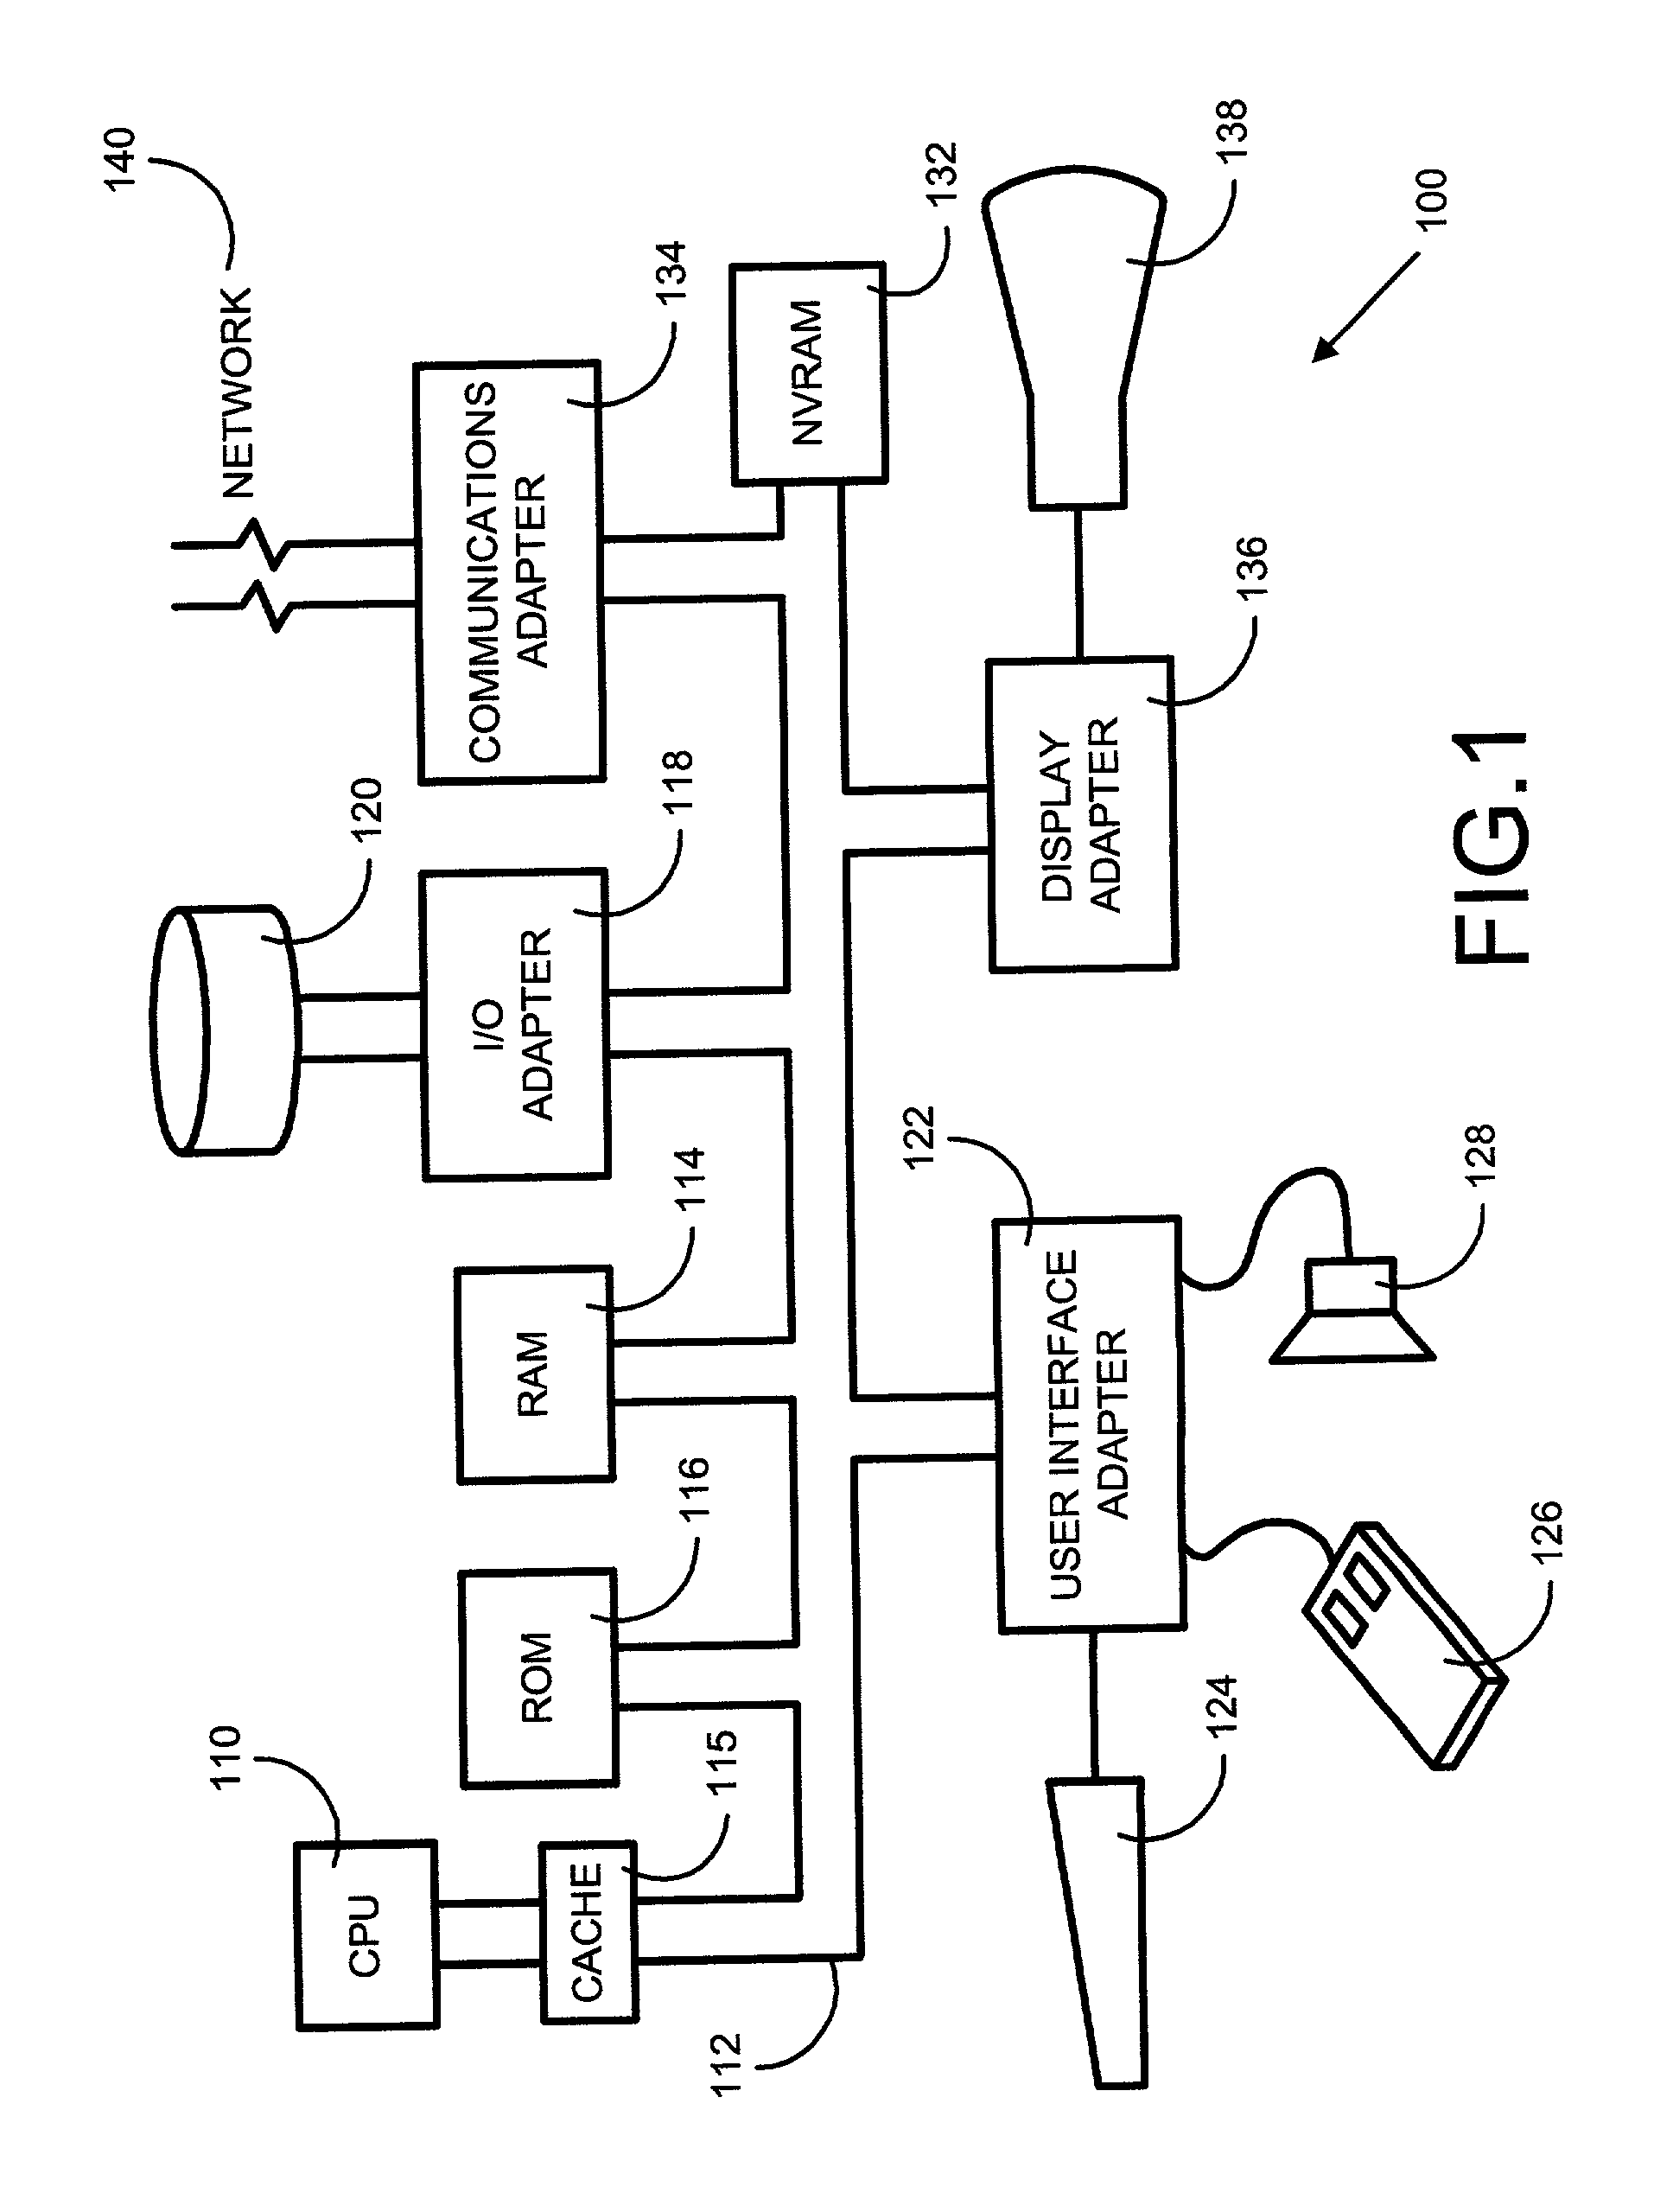 System and method for providing connection orientation based access authentication